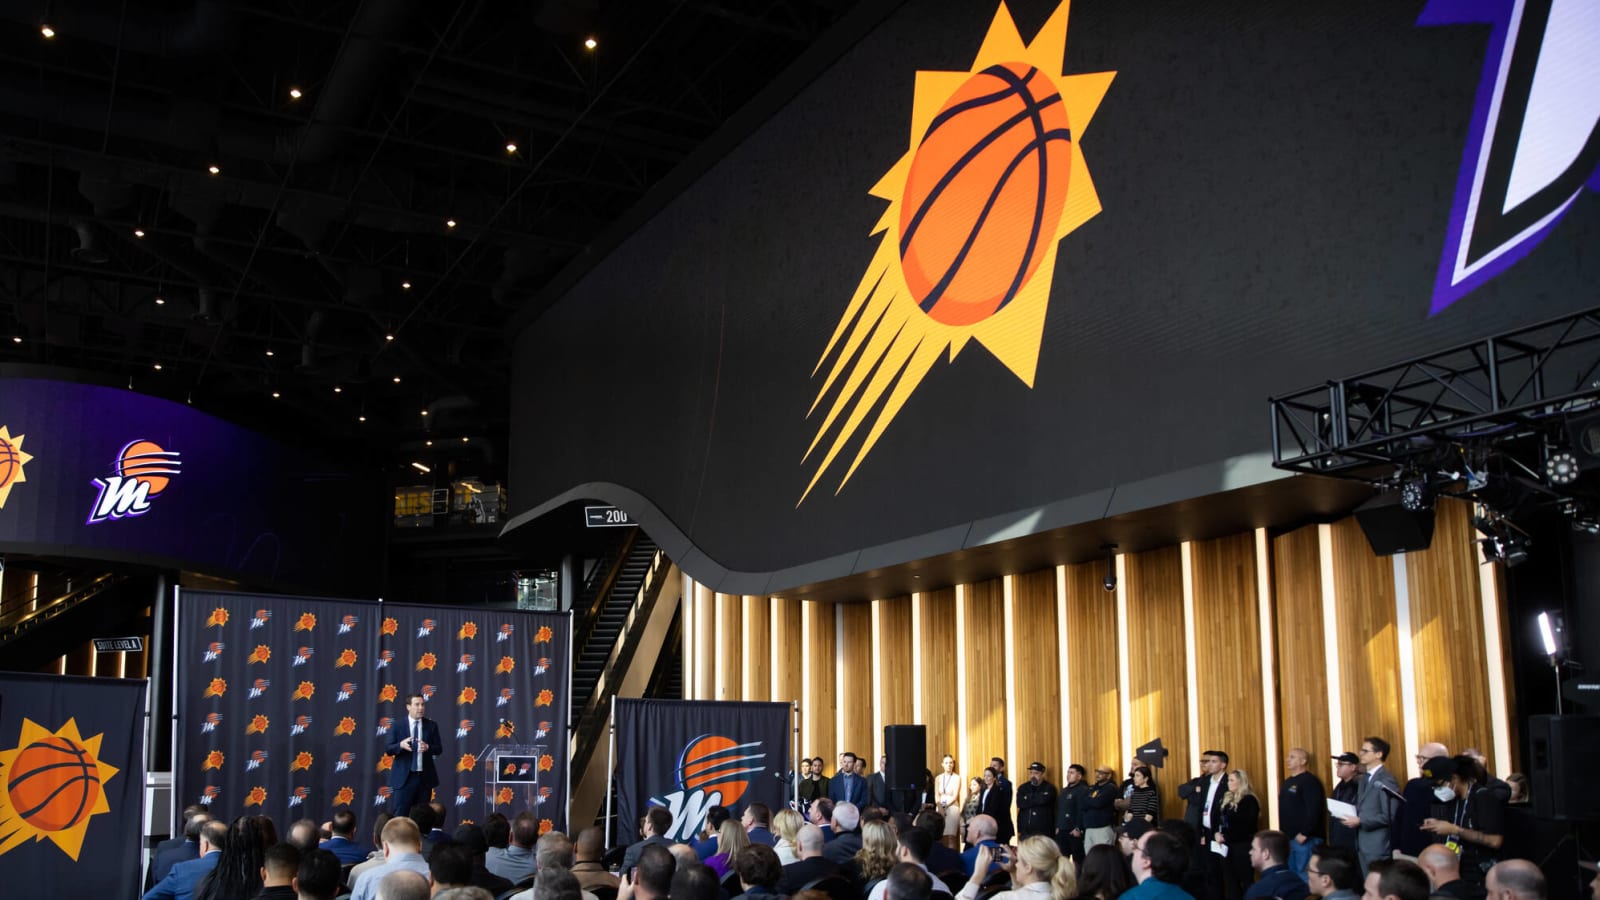 Woj: Suns to hire Pistons exec Bartelstein as new CEO